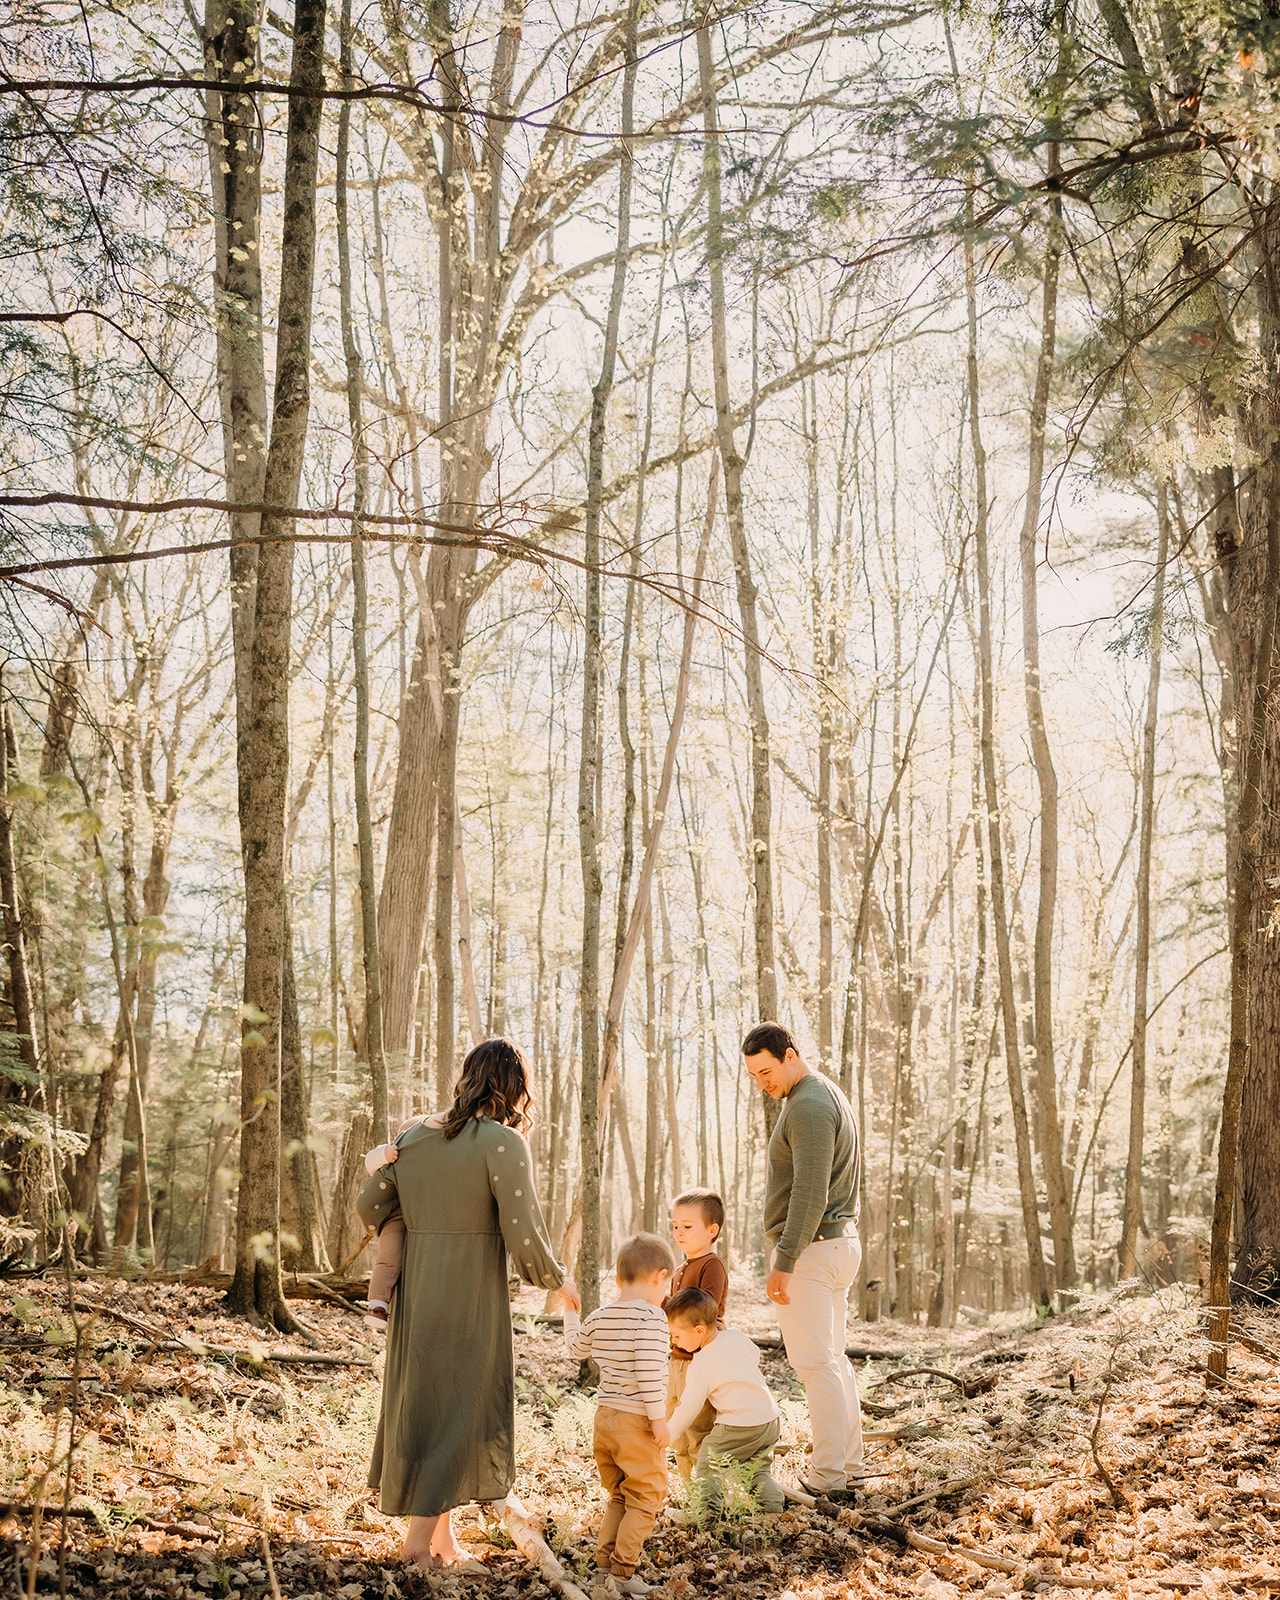 Candid moments of love and laughter in a forest photoshoot with parents and children